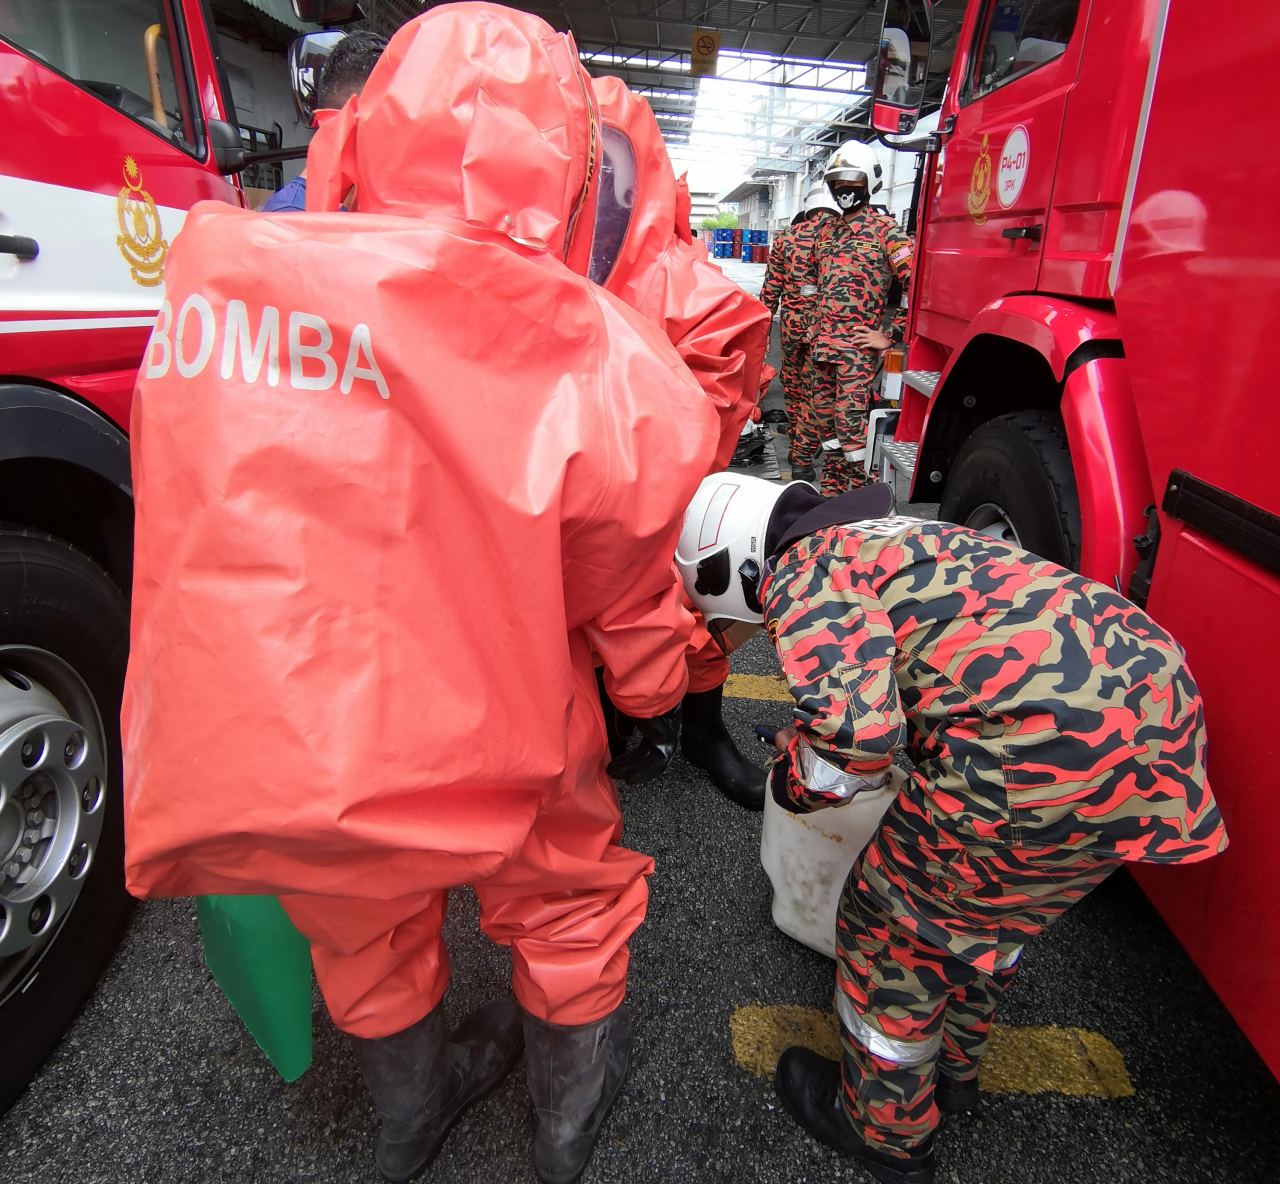 Officers from the Bayan Lepas Fire and Rescue Department don their protection gear, after a hazardous chemical spill at the Bayan Lepas Free Industrial Zone, on October 2, 2020. – RACHEL/The Vibes, October 2, 2020